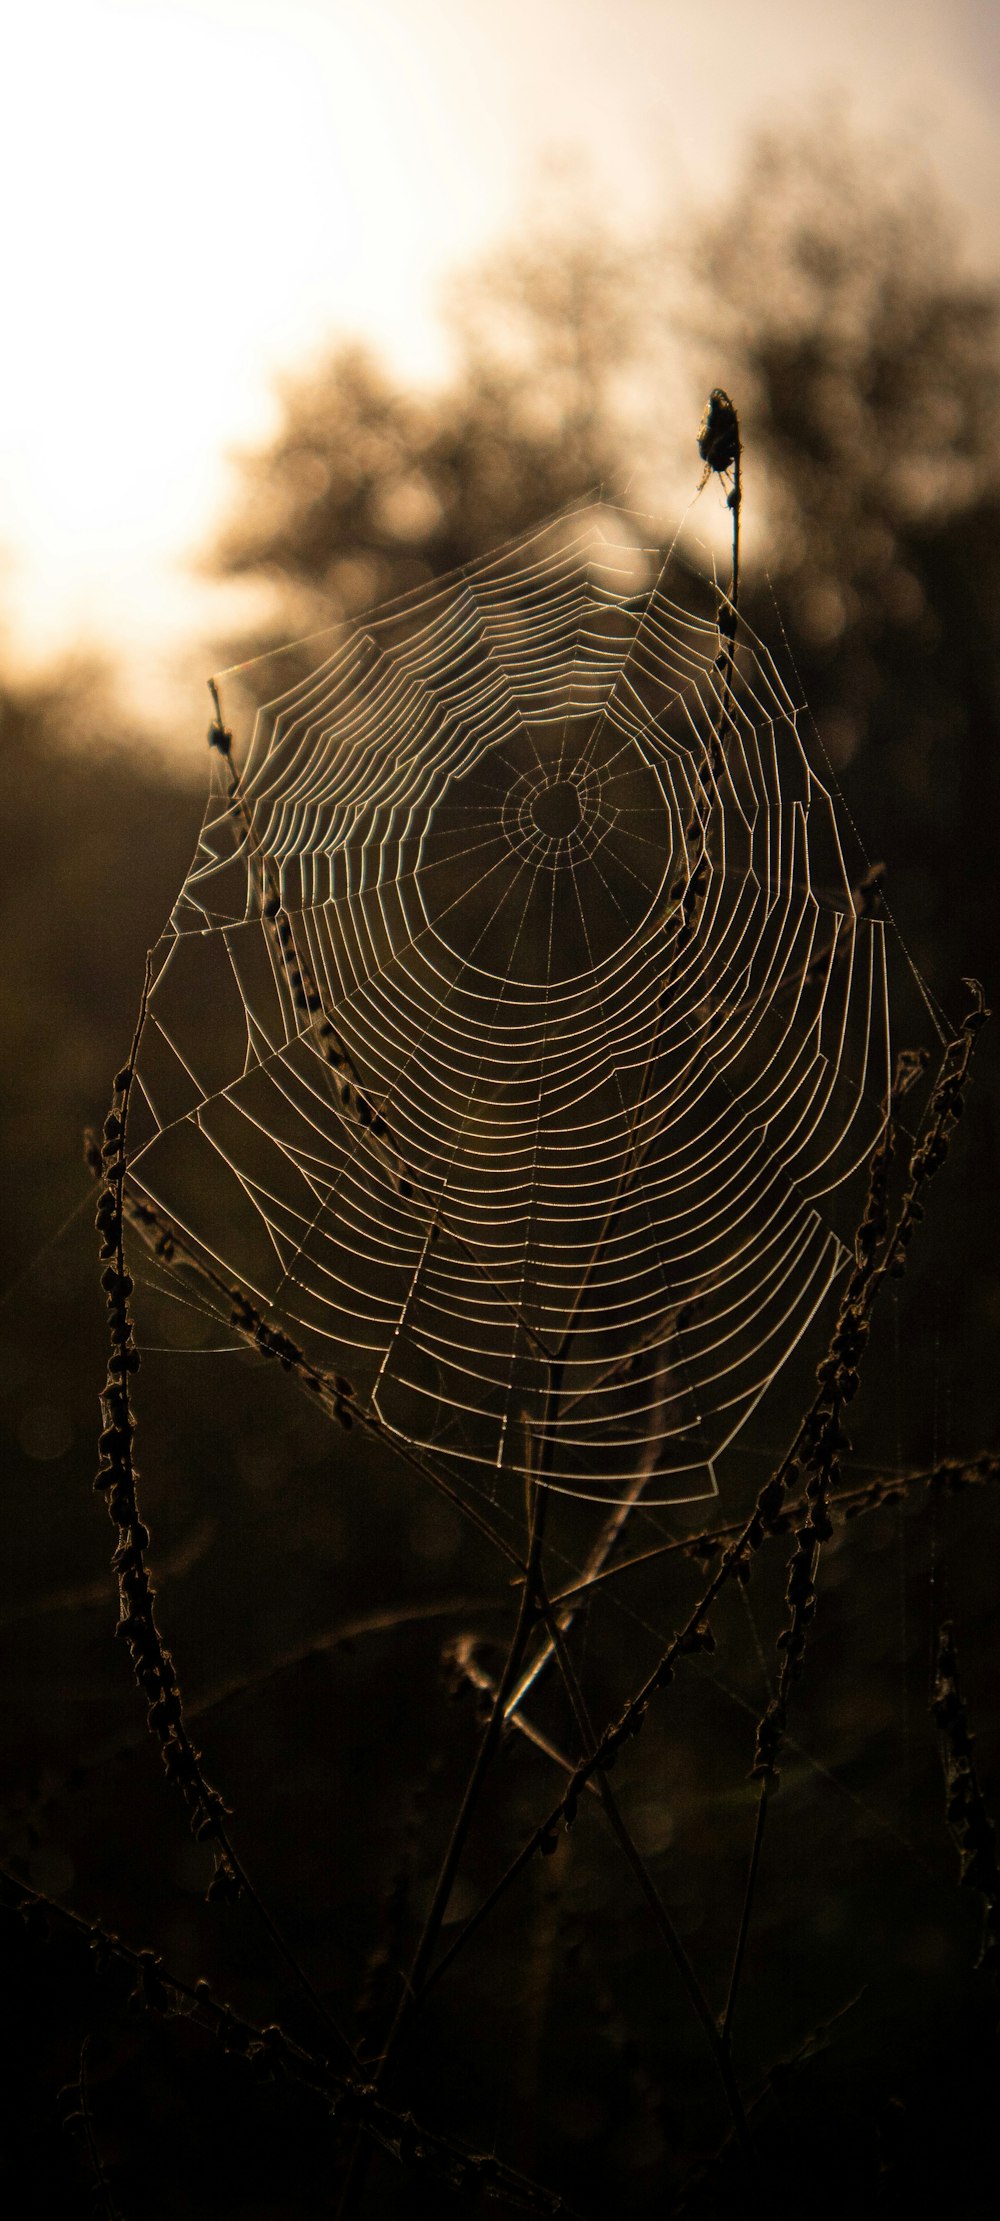 a large spider web